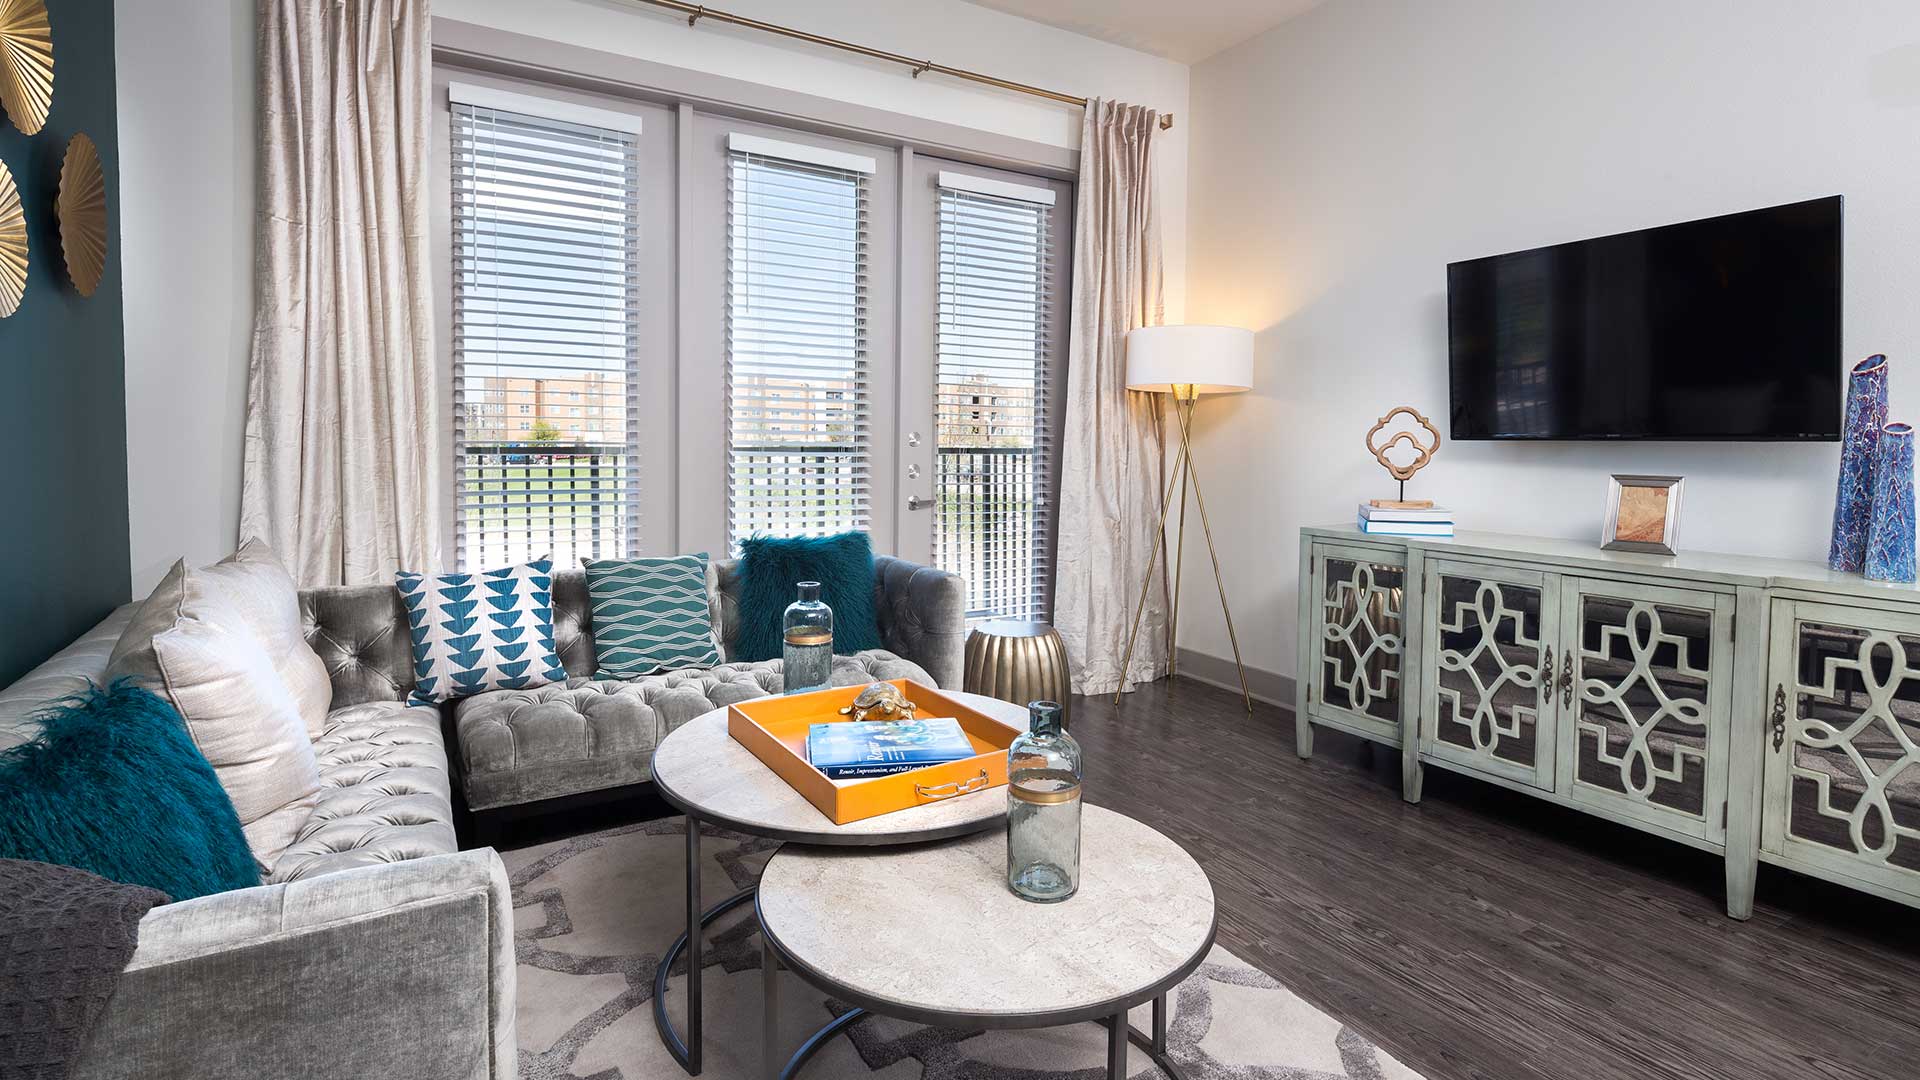 A living room in a residence at Crest at Las Colinas Station. A sectional couch is on the left with a set of round coffee tables before it. On the right is a dresser with various art pieces on it and a flat screen on the wall above. There are three large windows in the middle.